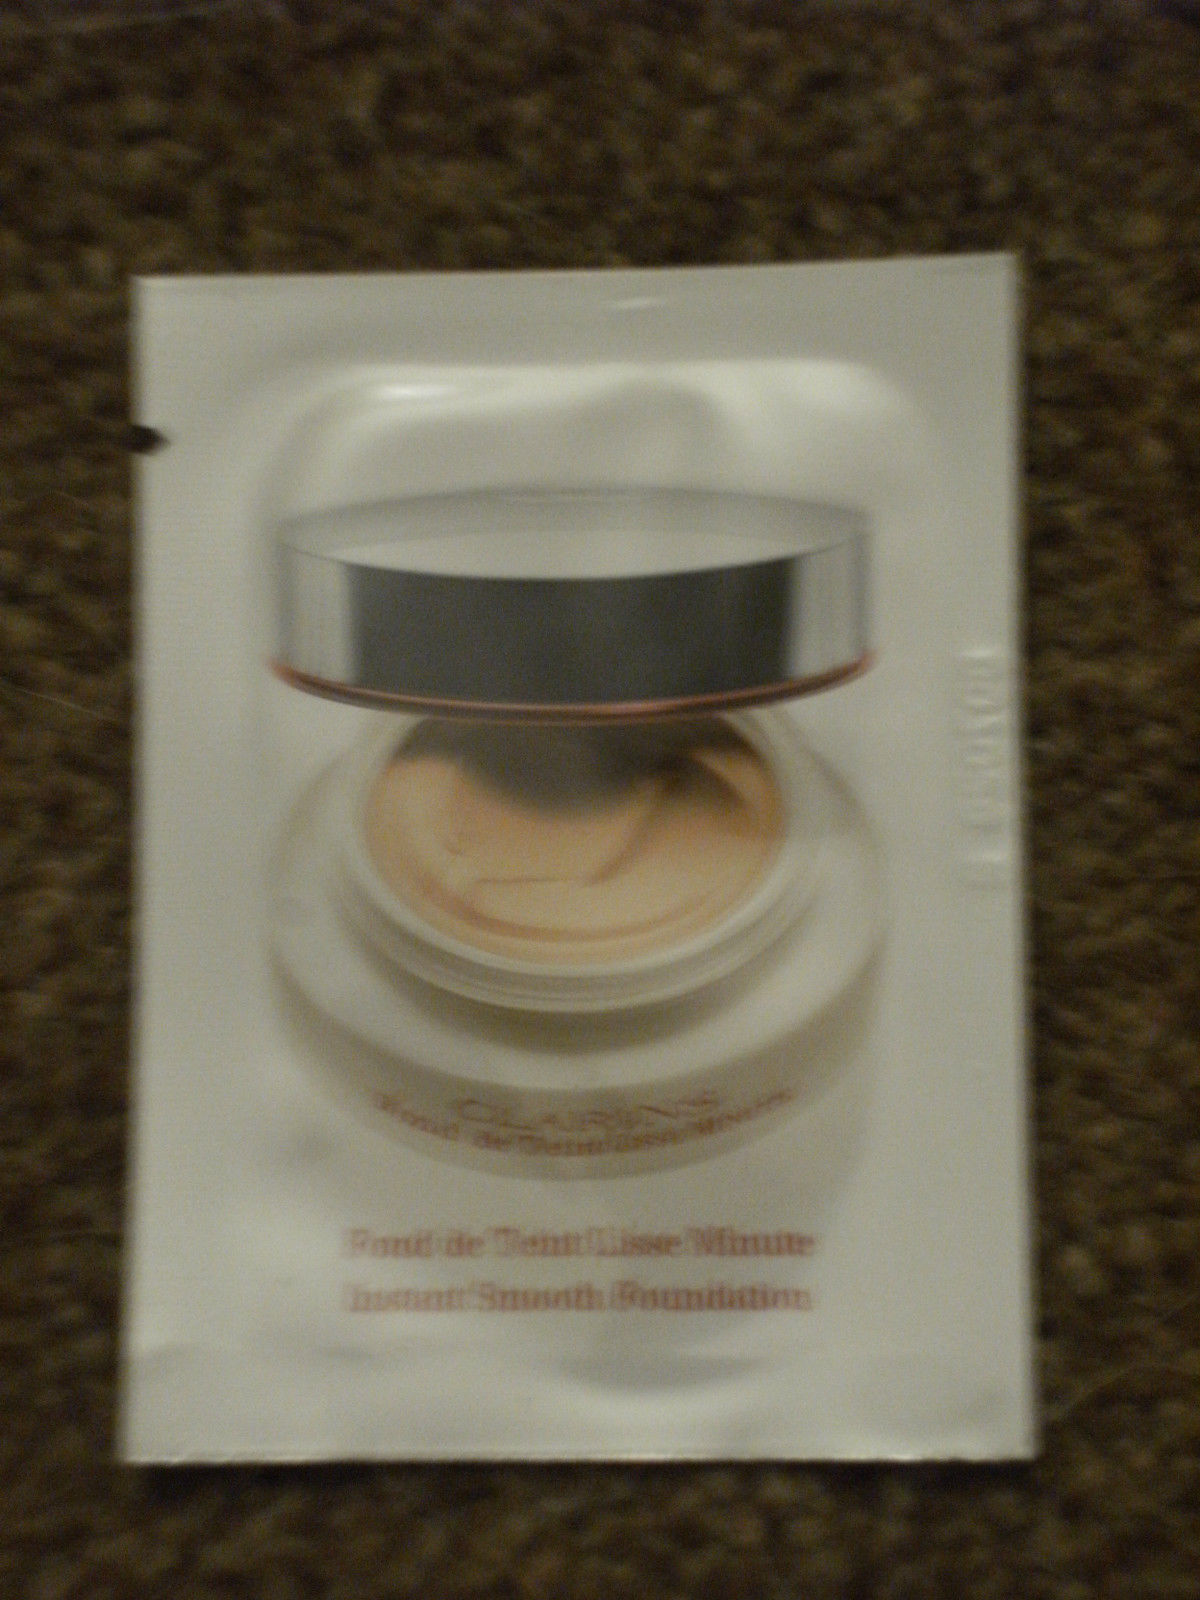 Clarins-INSTANT-SMOOTH-FOUNDATION-MAKEUP-Samples